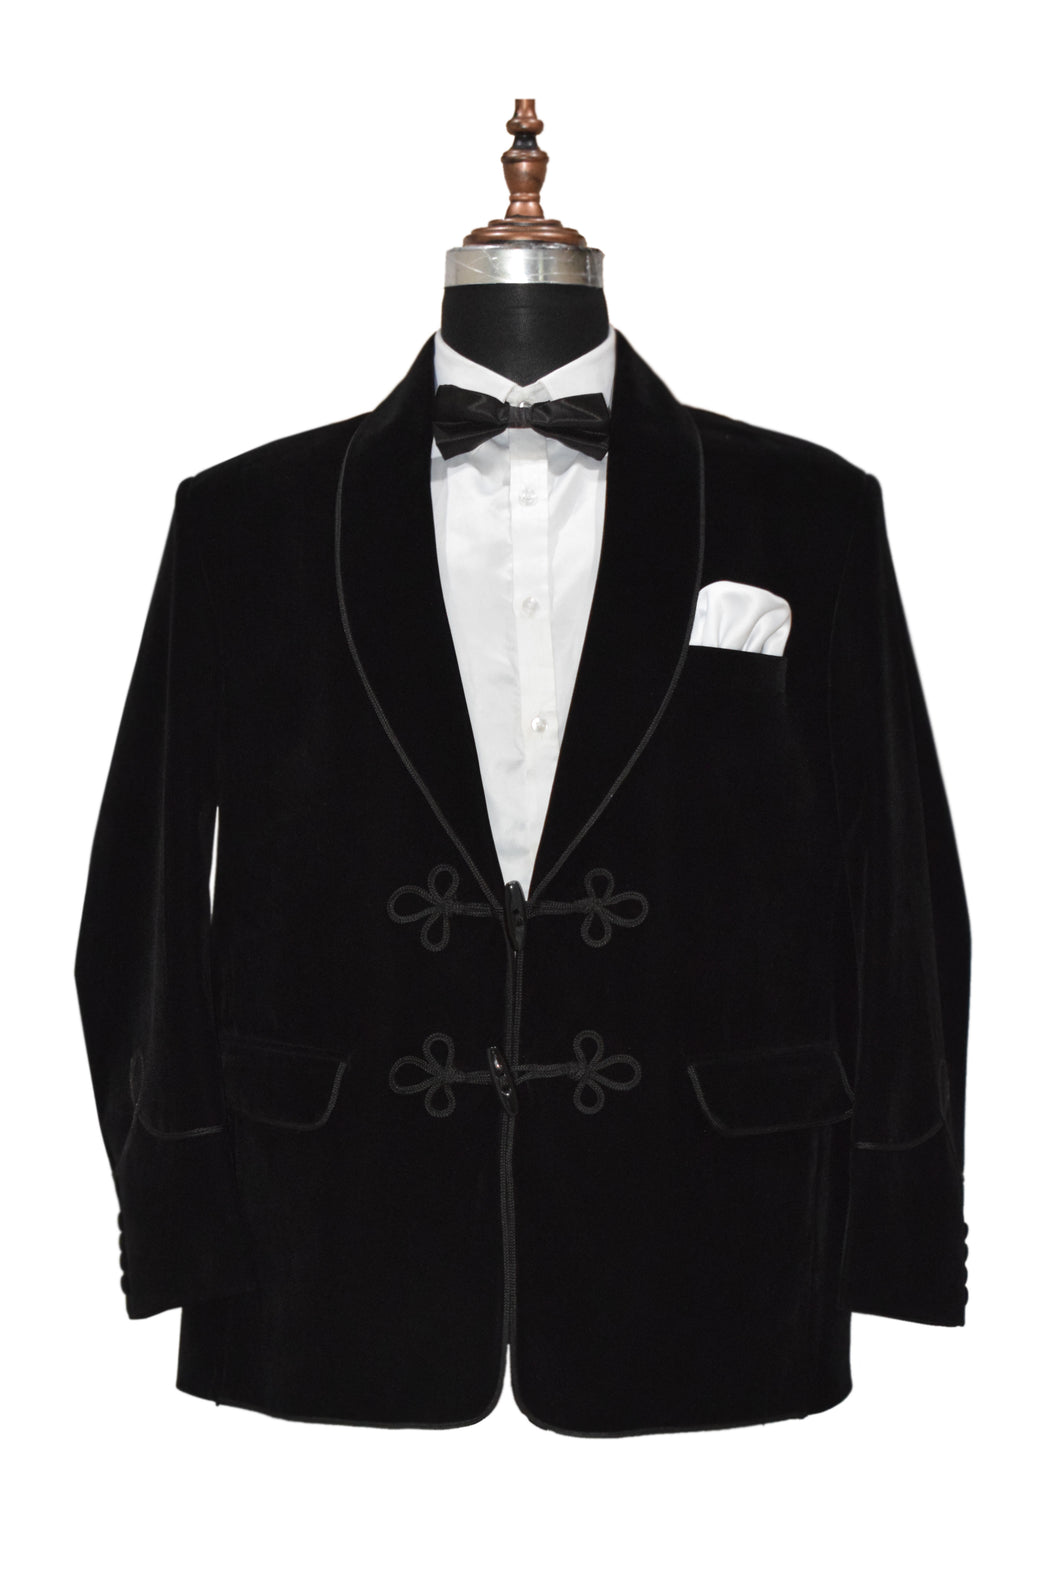 Dr Who Style Black Smoking Jacket Dinner Party Wear Coat